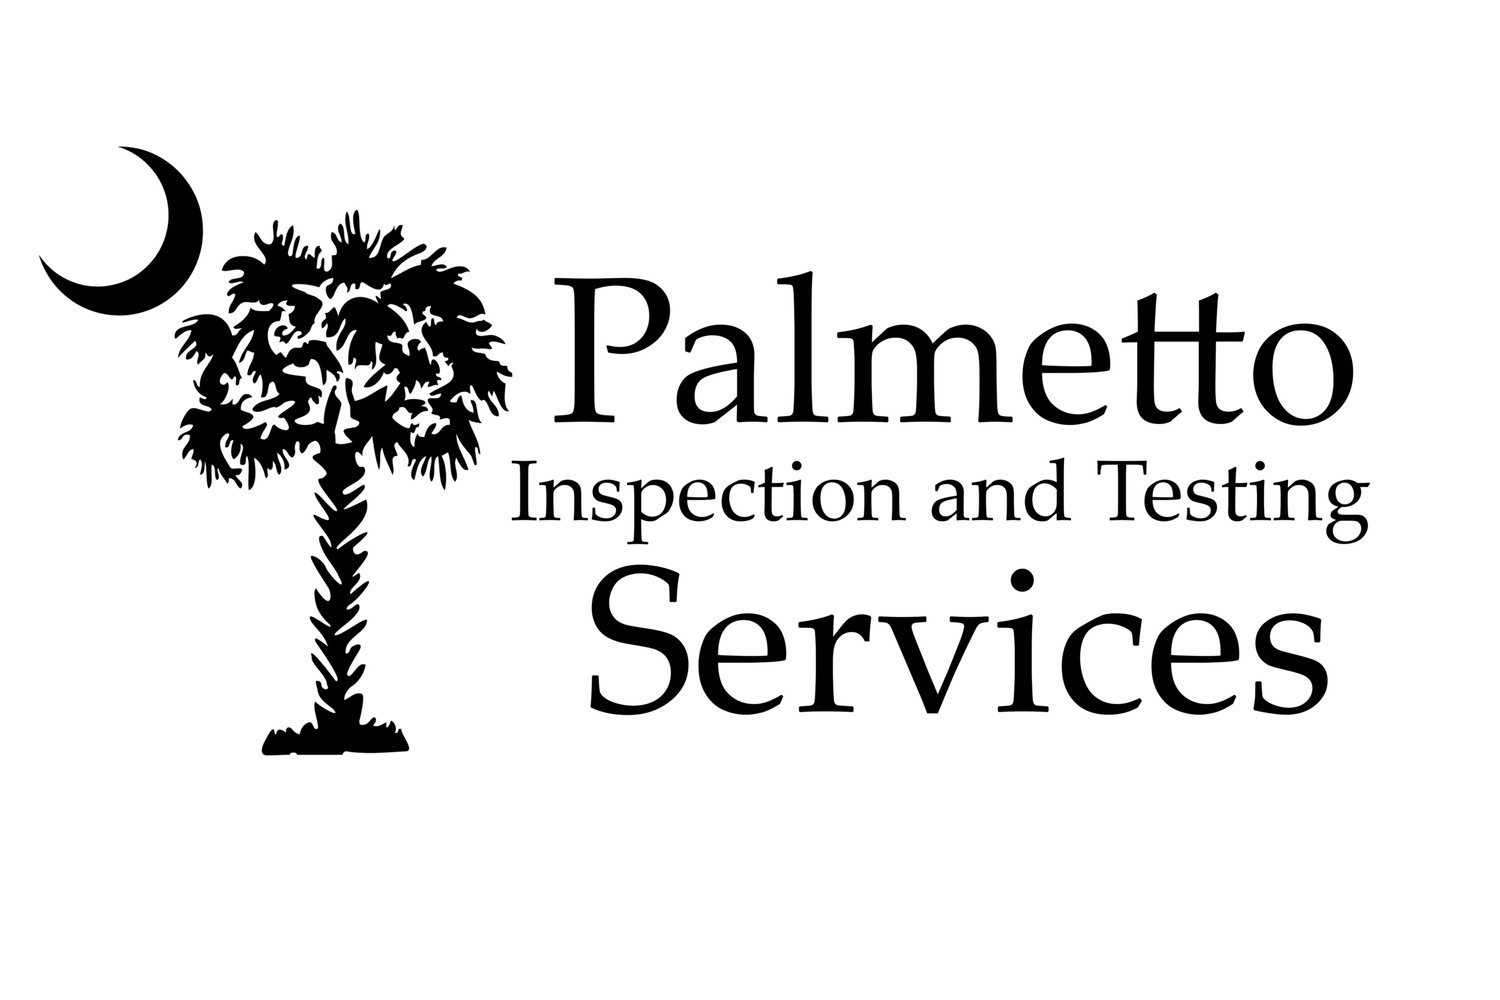 Palmetto Inspection and Testing Services